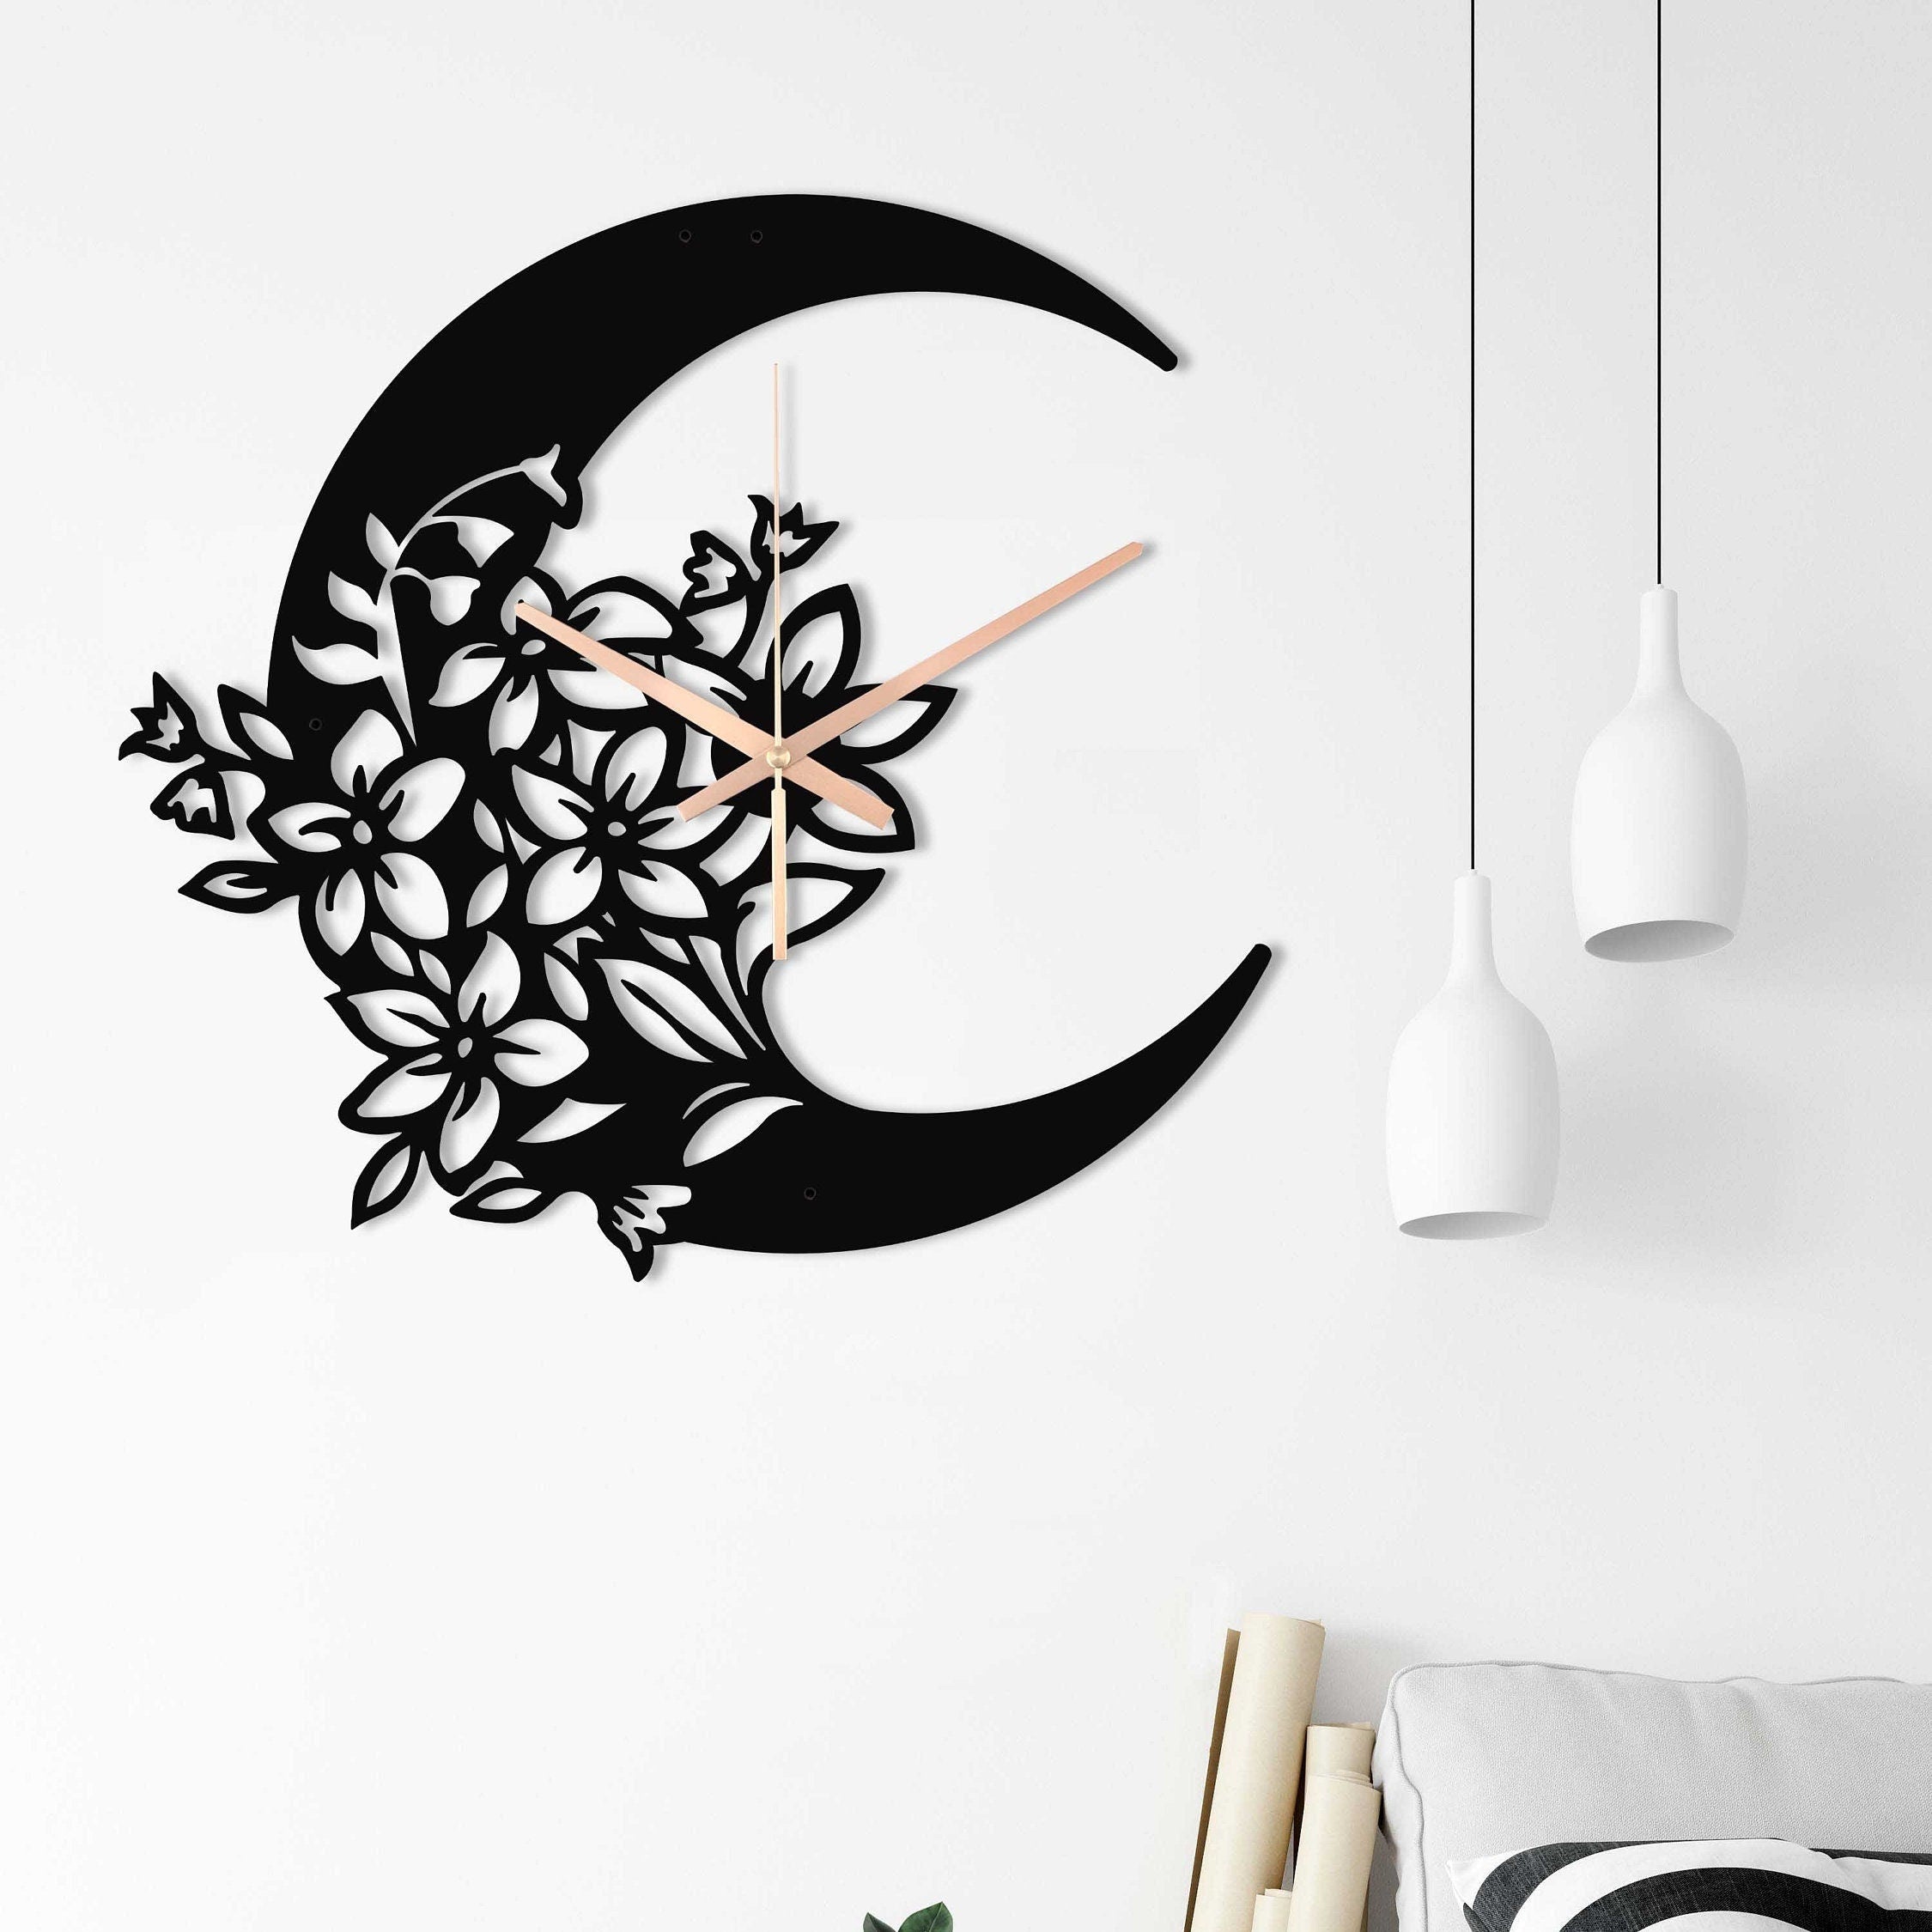 Moon Flowers Clock, Oversized Wall Clock, Modern Small Wall Clock, Large Silent Flowers Wall Clock, Home Decor And Gifts, Laser Cut Clock